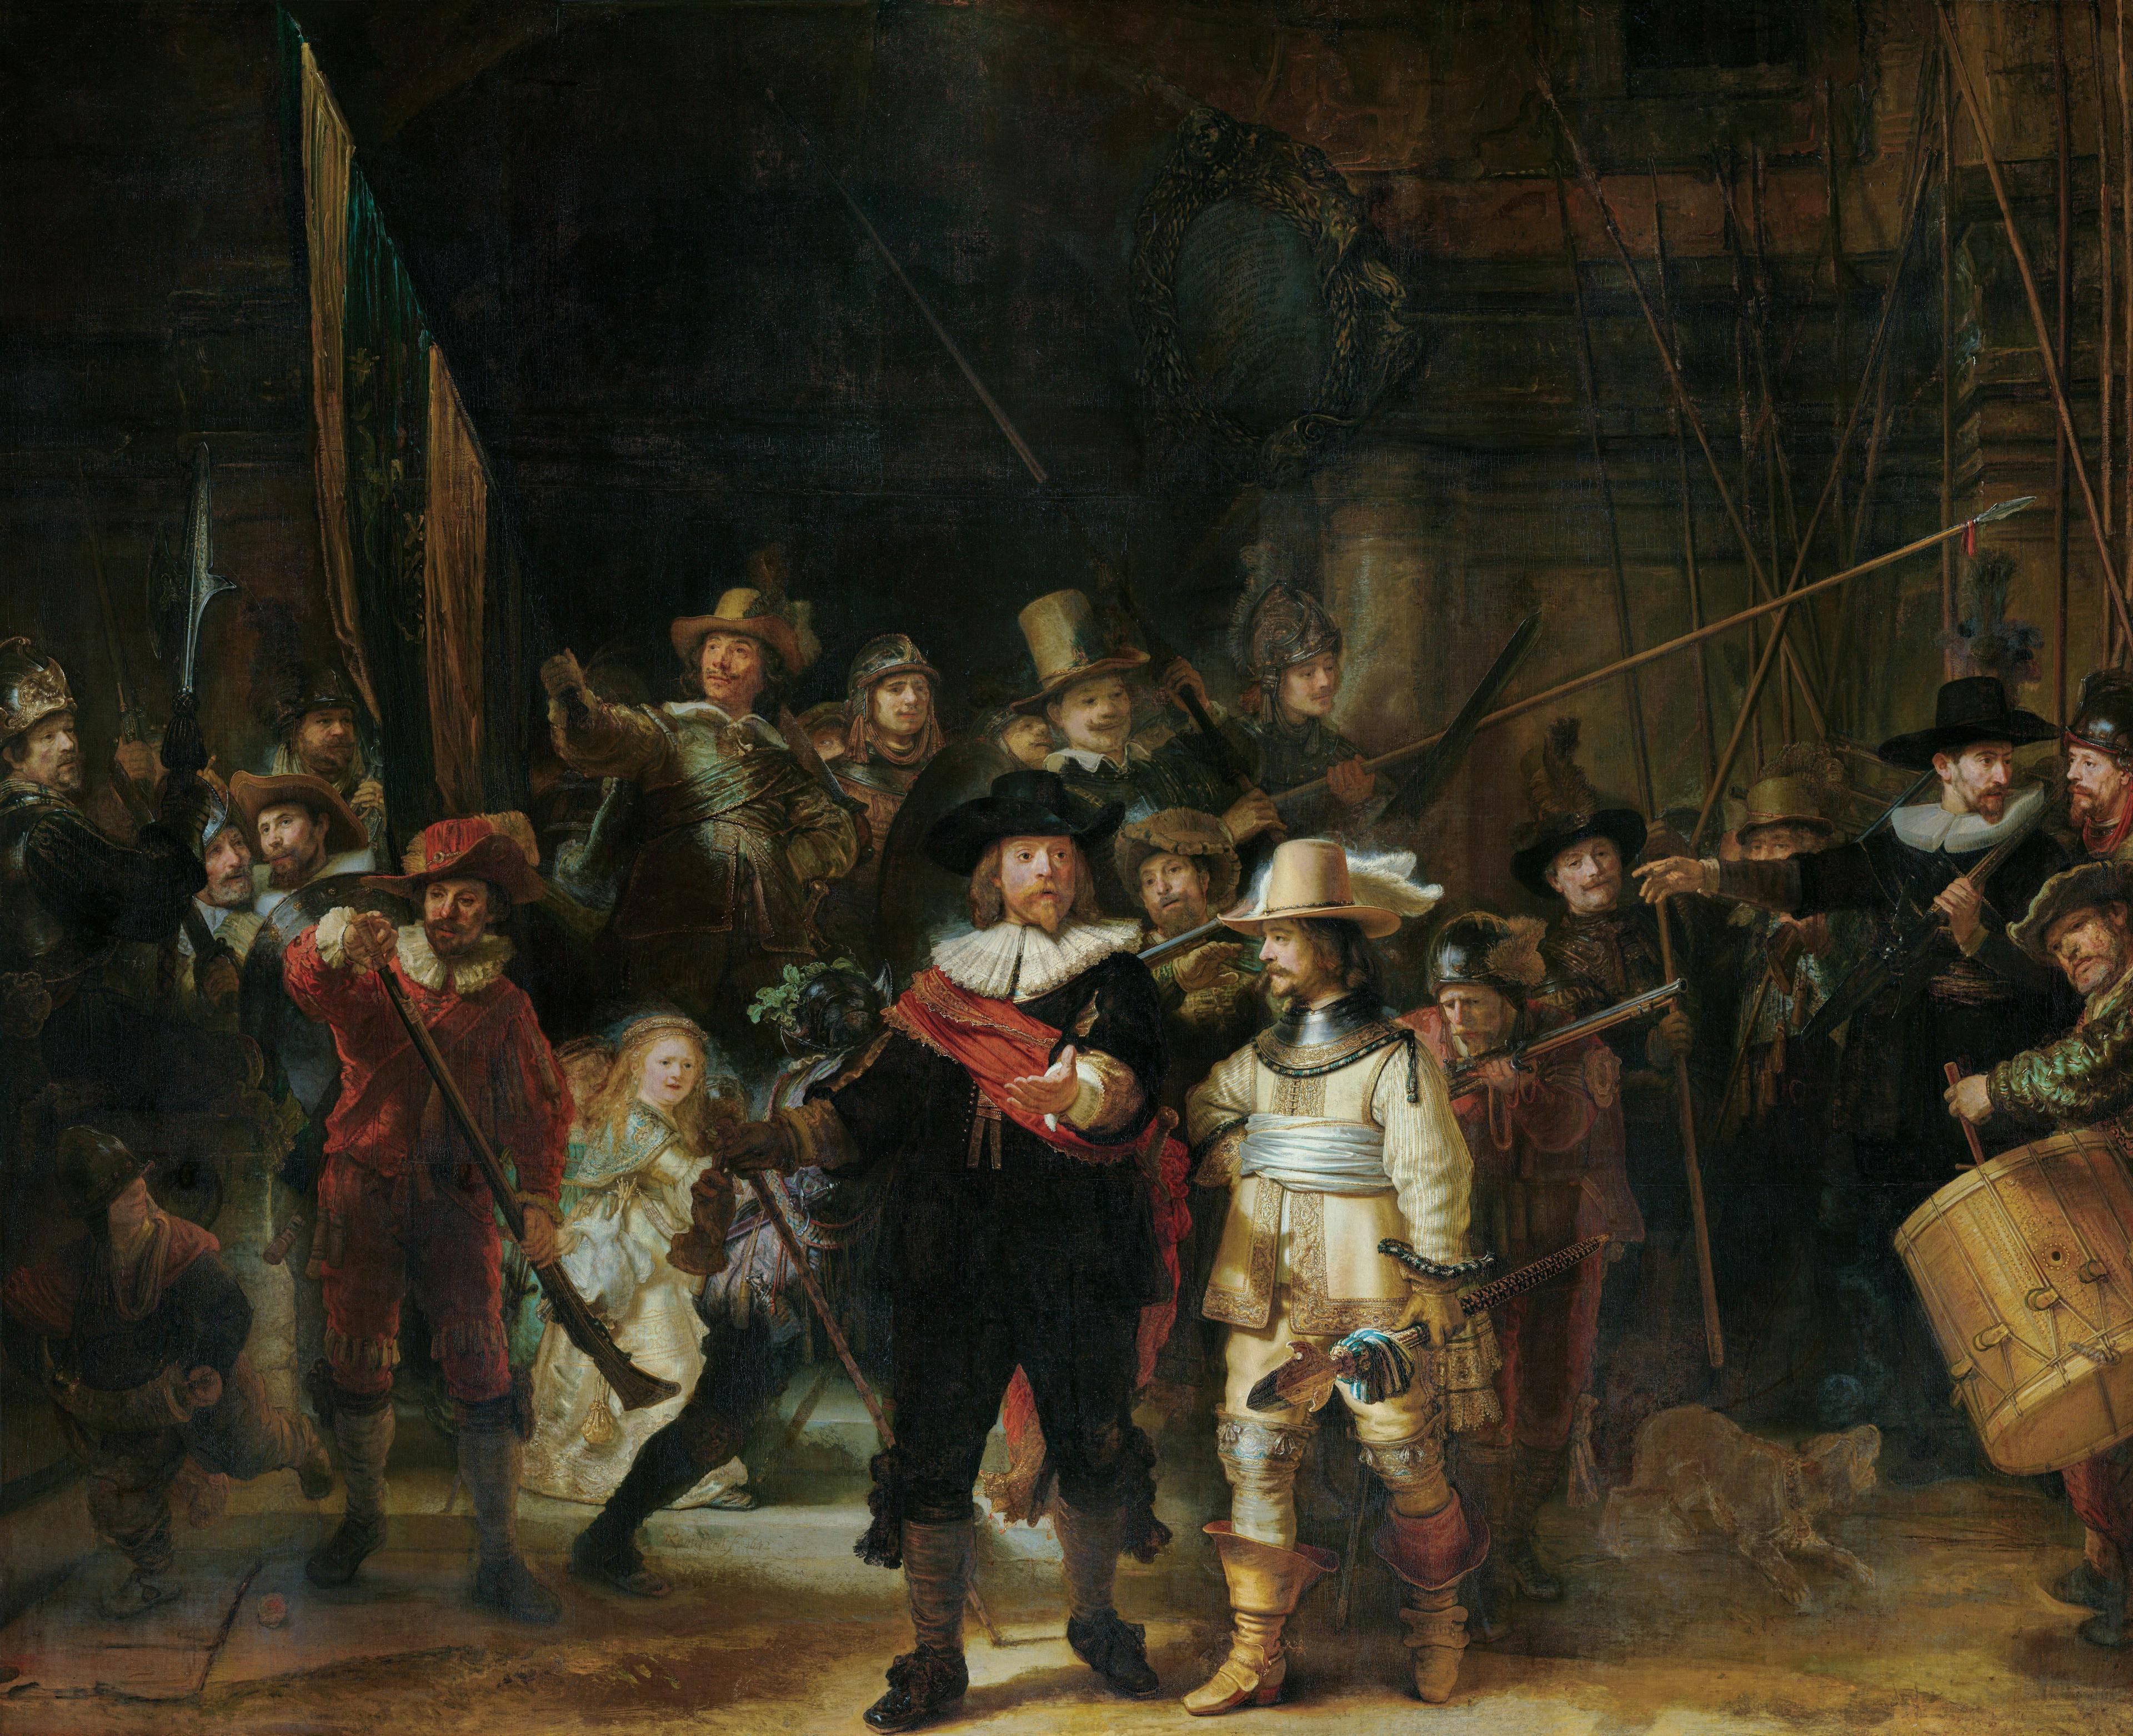 Rembrandt van Rijn (1606-1669) The Shooting Company of Frans Banning Cocq and Willem van Ruytenburch also know as The Night Watch, 1642. Oil on canvas, Rijksmuseum, Amsterdam


